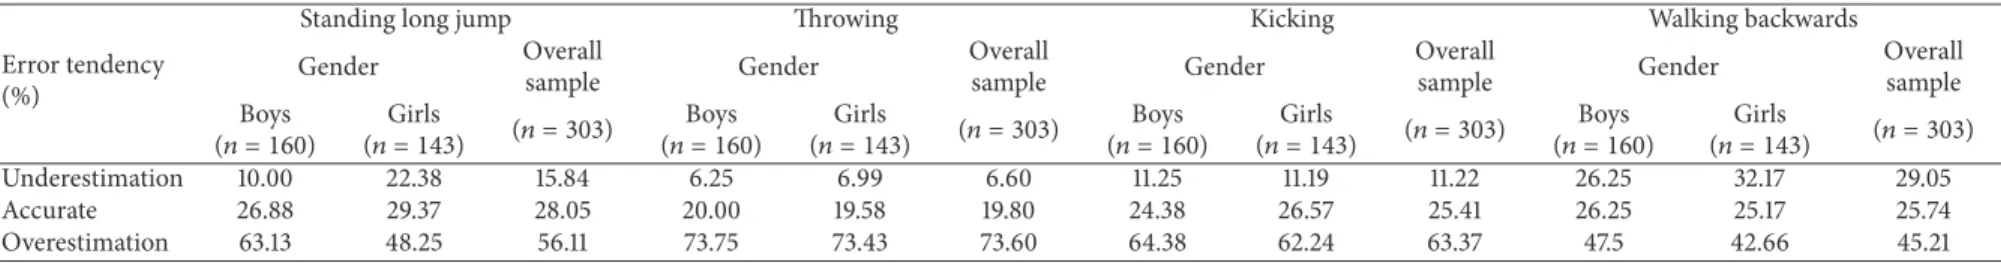 Table 1: Percentages of error tendency in the estimation of standing long jump, throwing, kicking, and walking backwards, for overall participants and divided by gender.